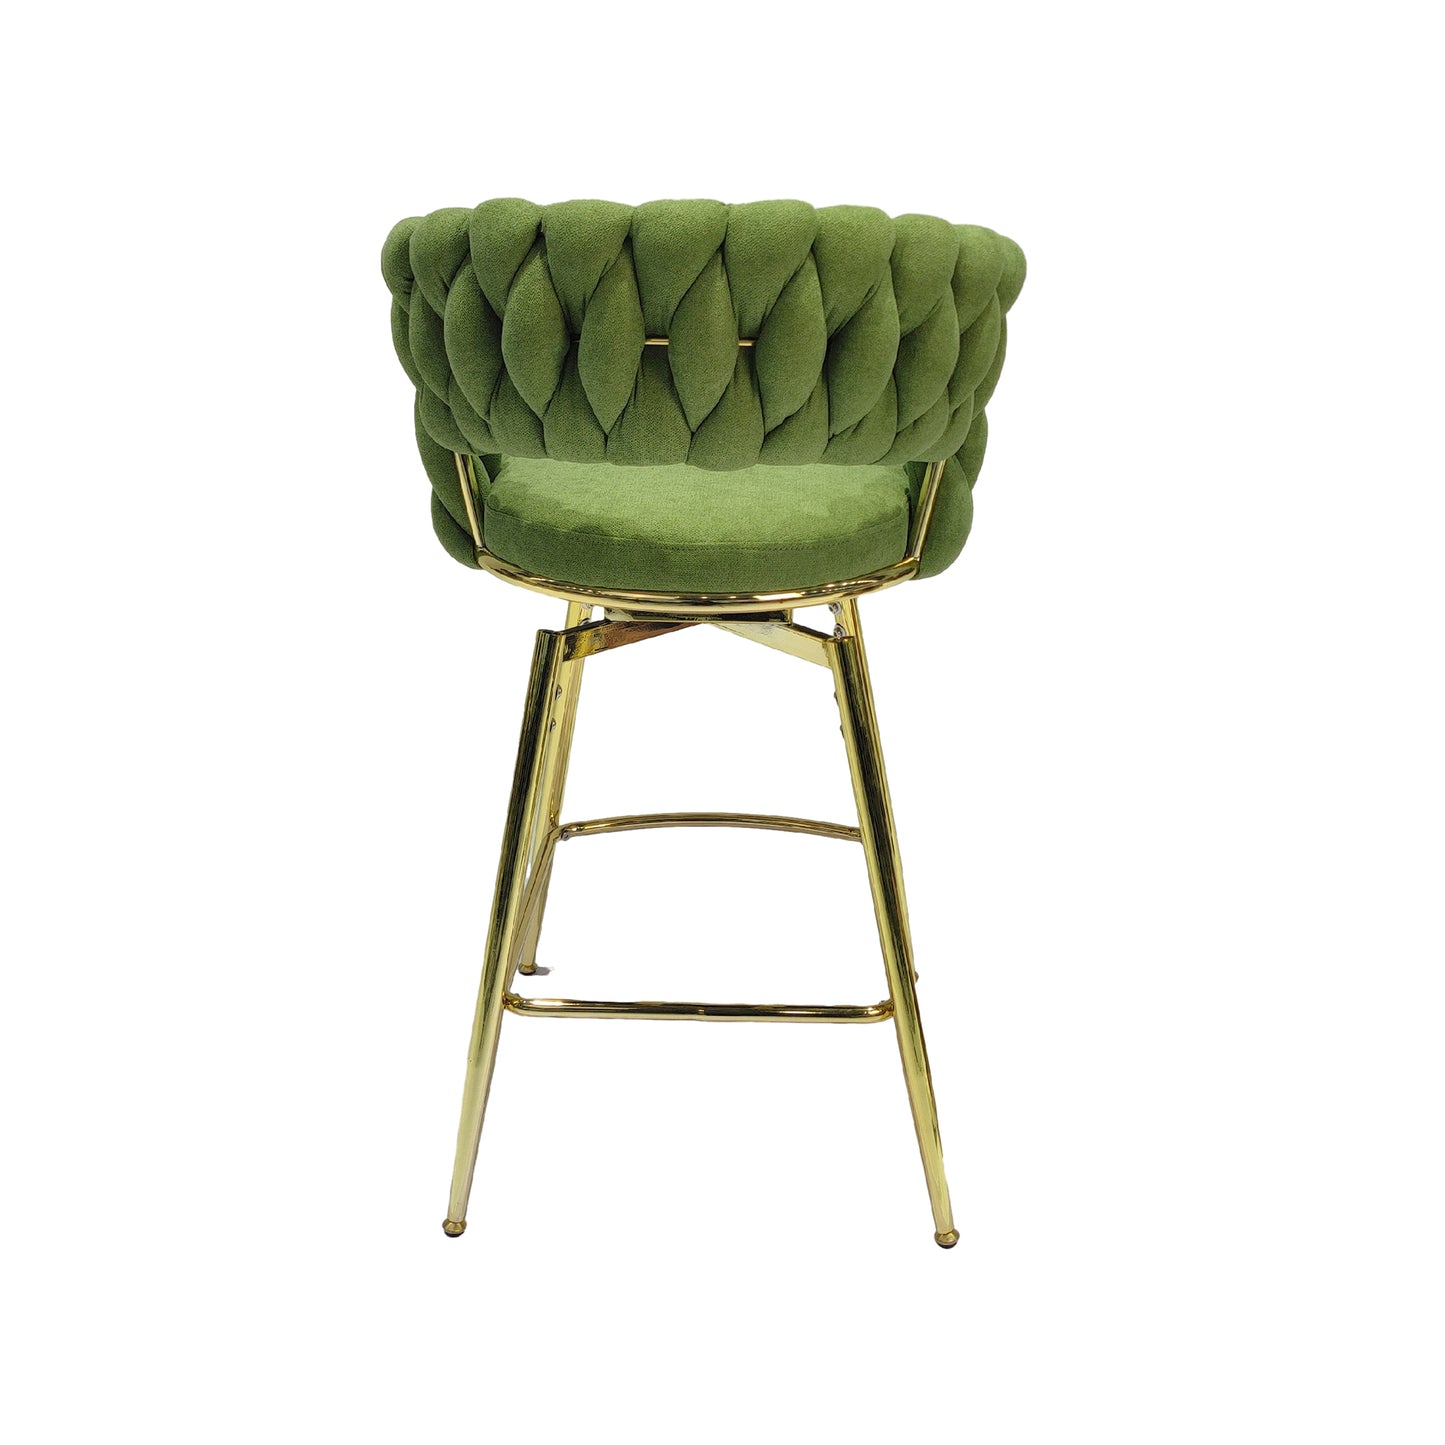 Bar Chair Linen Woven Bar Stool Set of 4,Golden legs Barstools No Adjustable Kitchen Island Chairs,360 Swivel Bar Stools Upholstered Bar Chair Counter Stool Arm Chairs with Back Footrest, (Green)